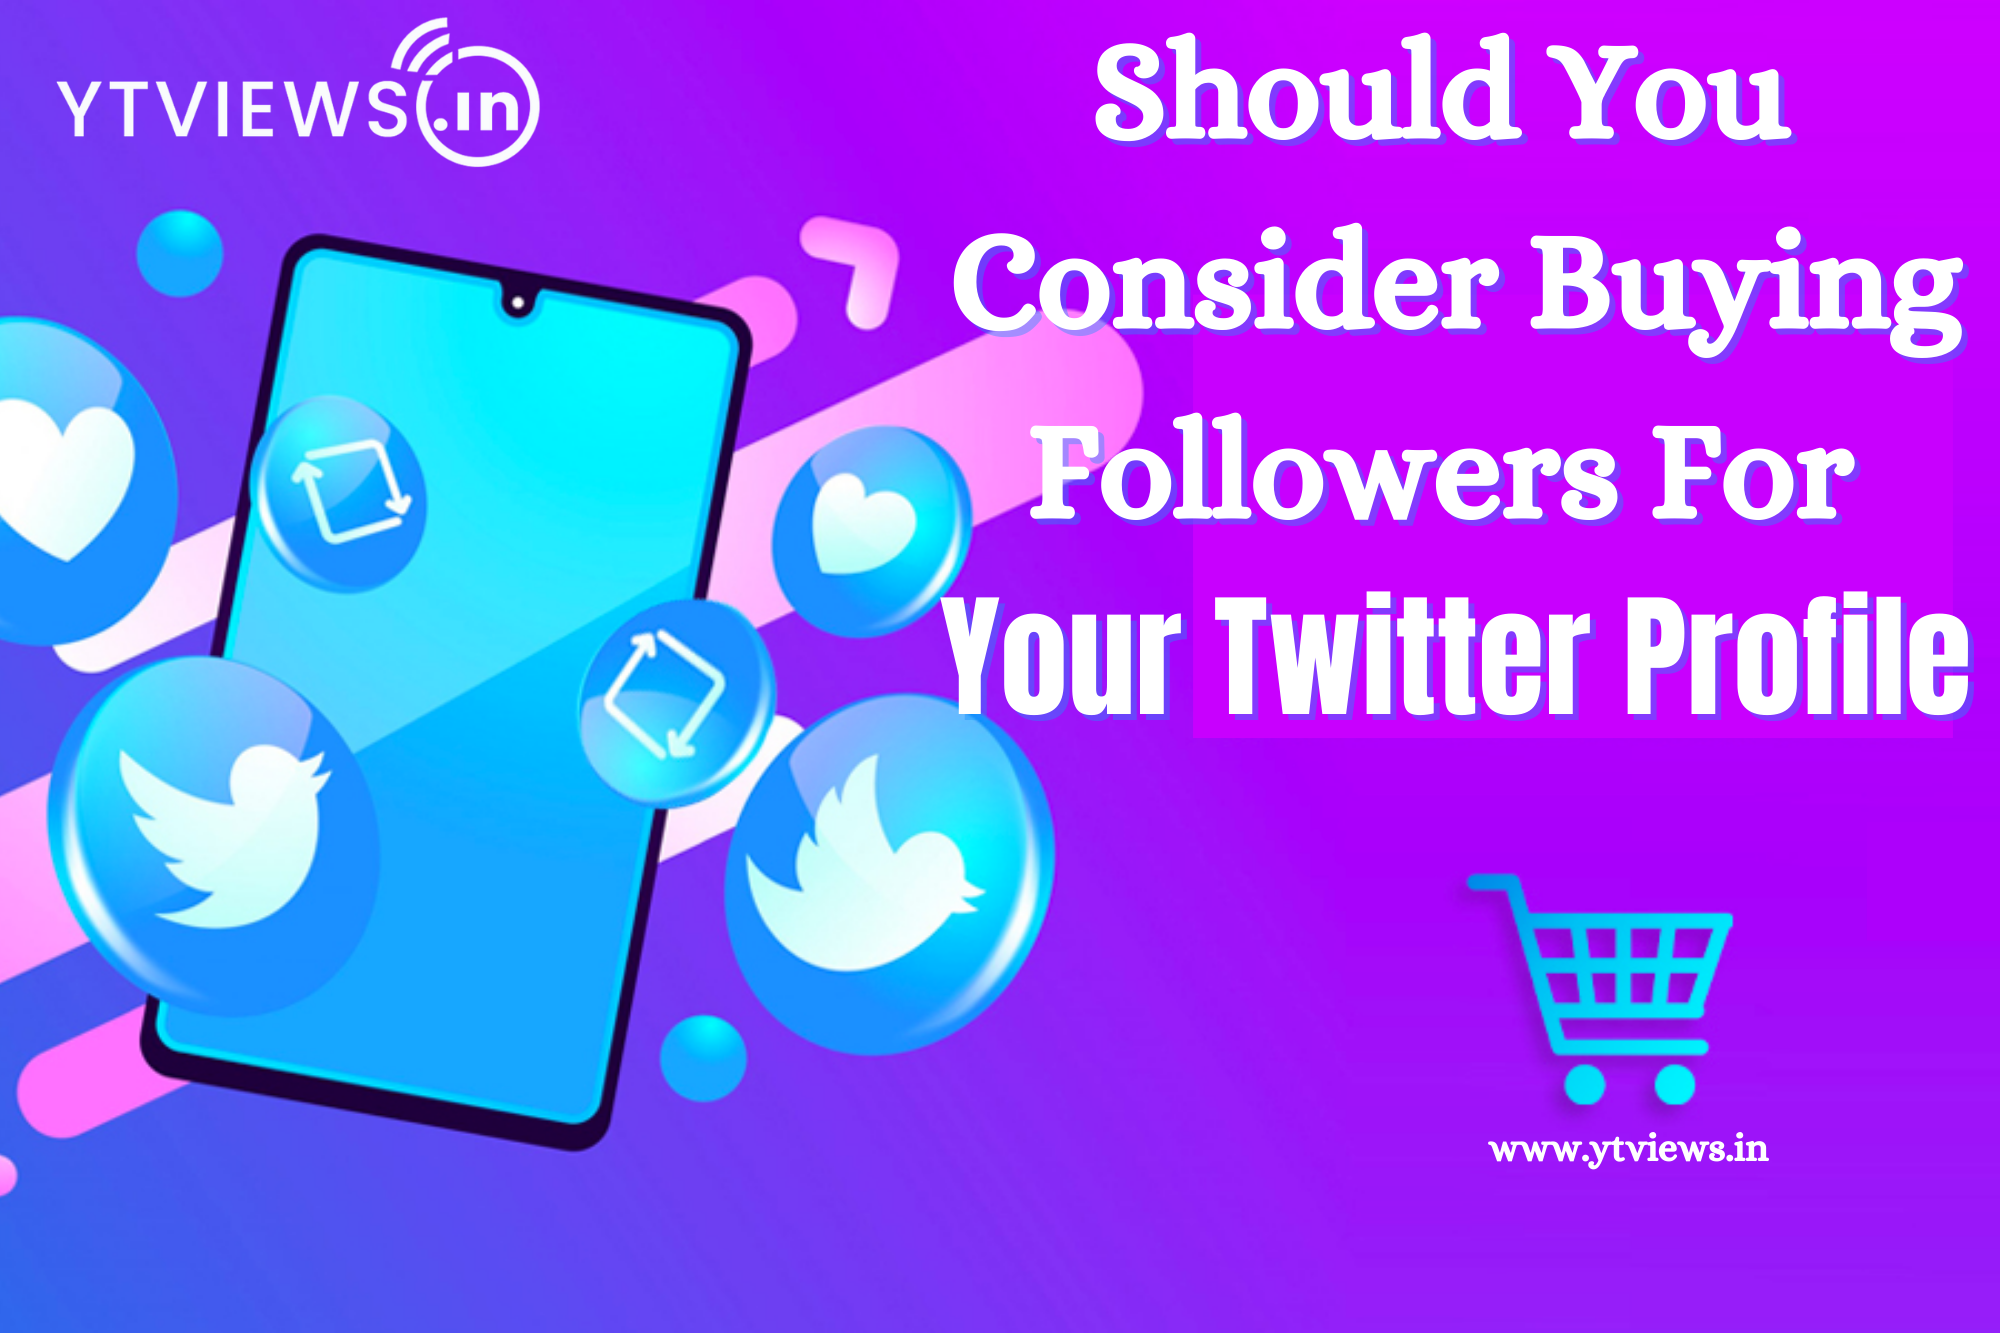 Should you consider buying followers for your Twitter profile?